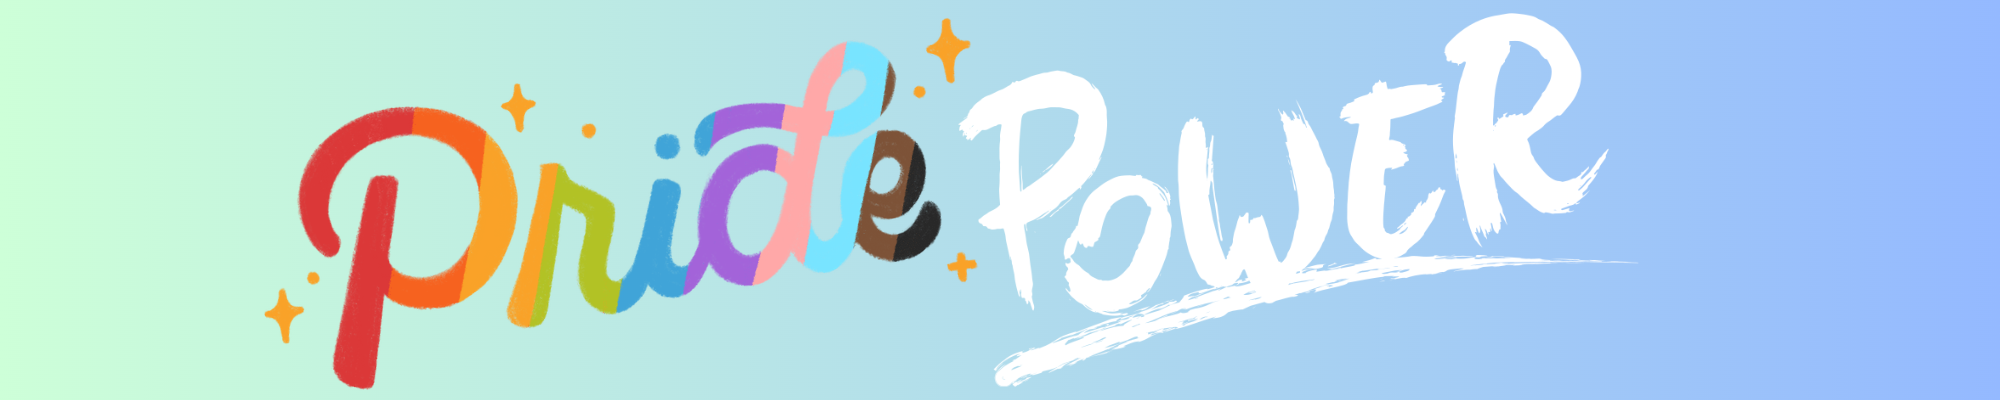 A banner with the words "Pride Power" on it. Pride is in rainbow with stars around it and Power is in black.